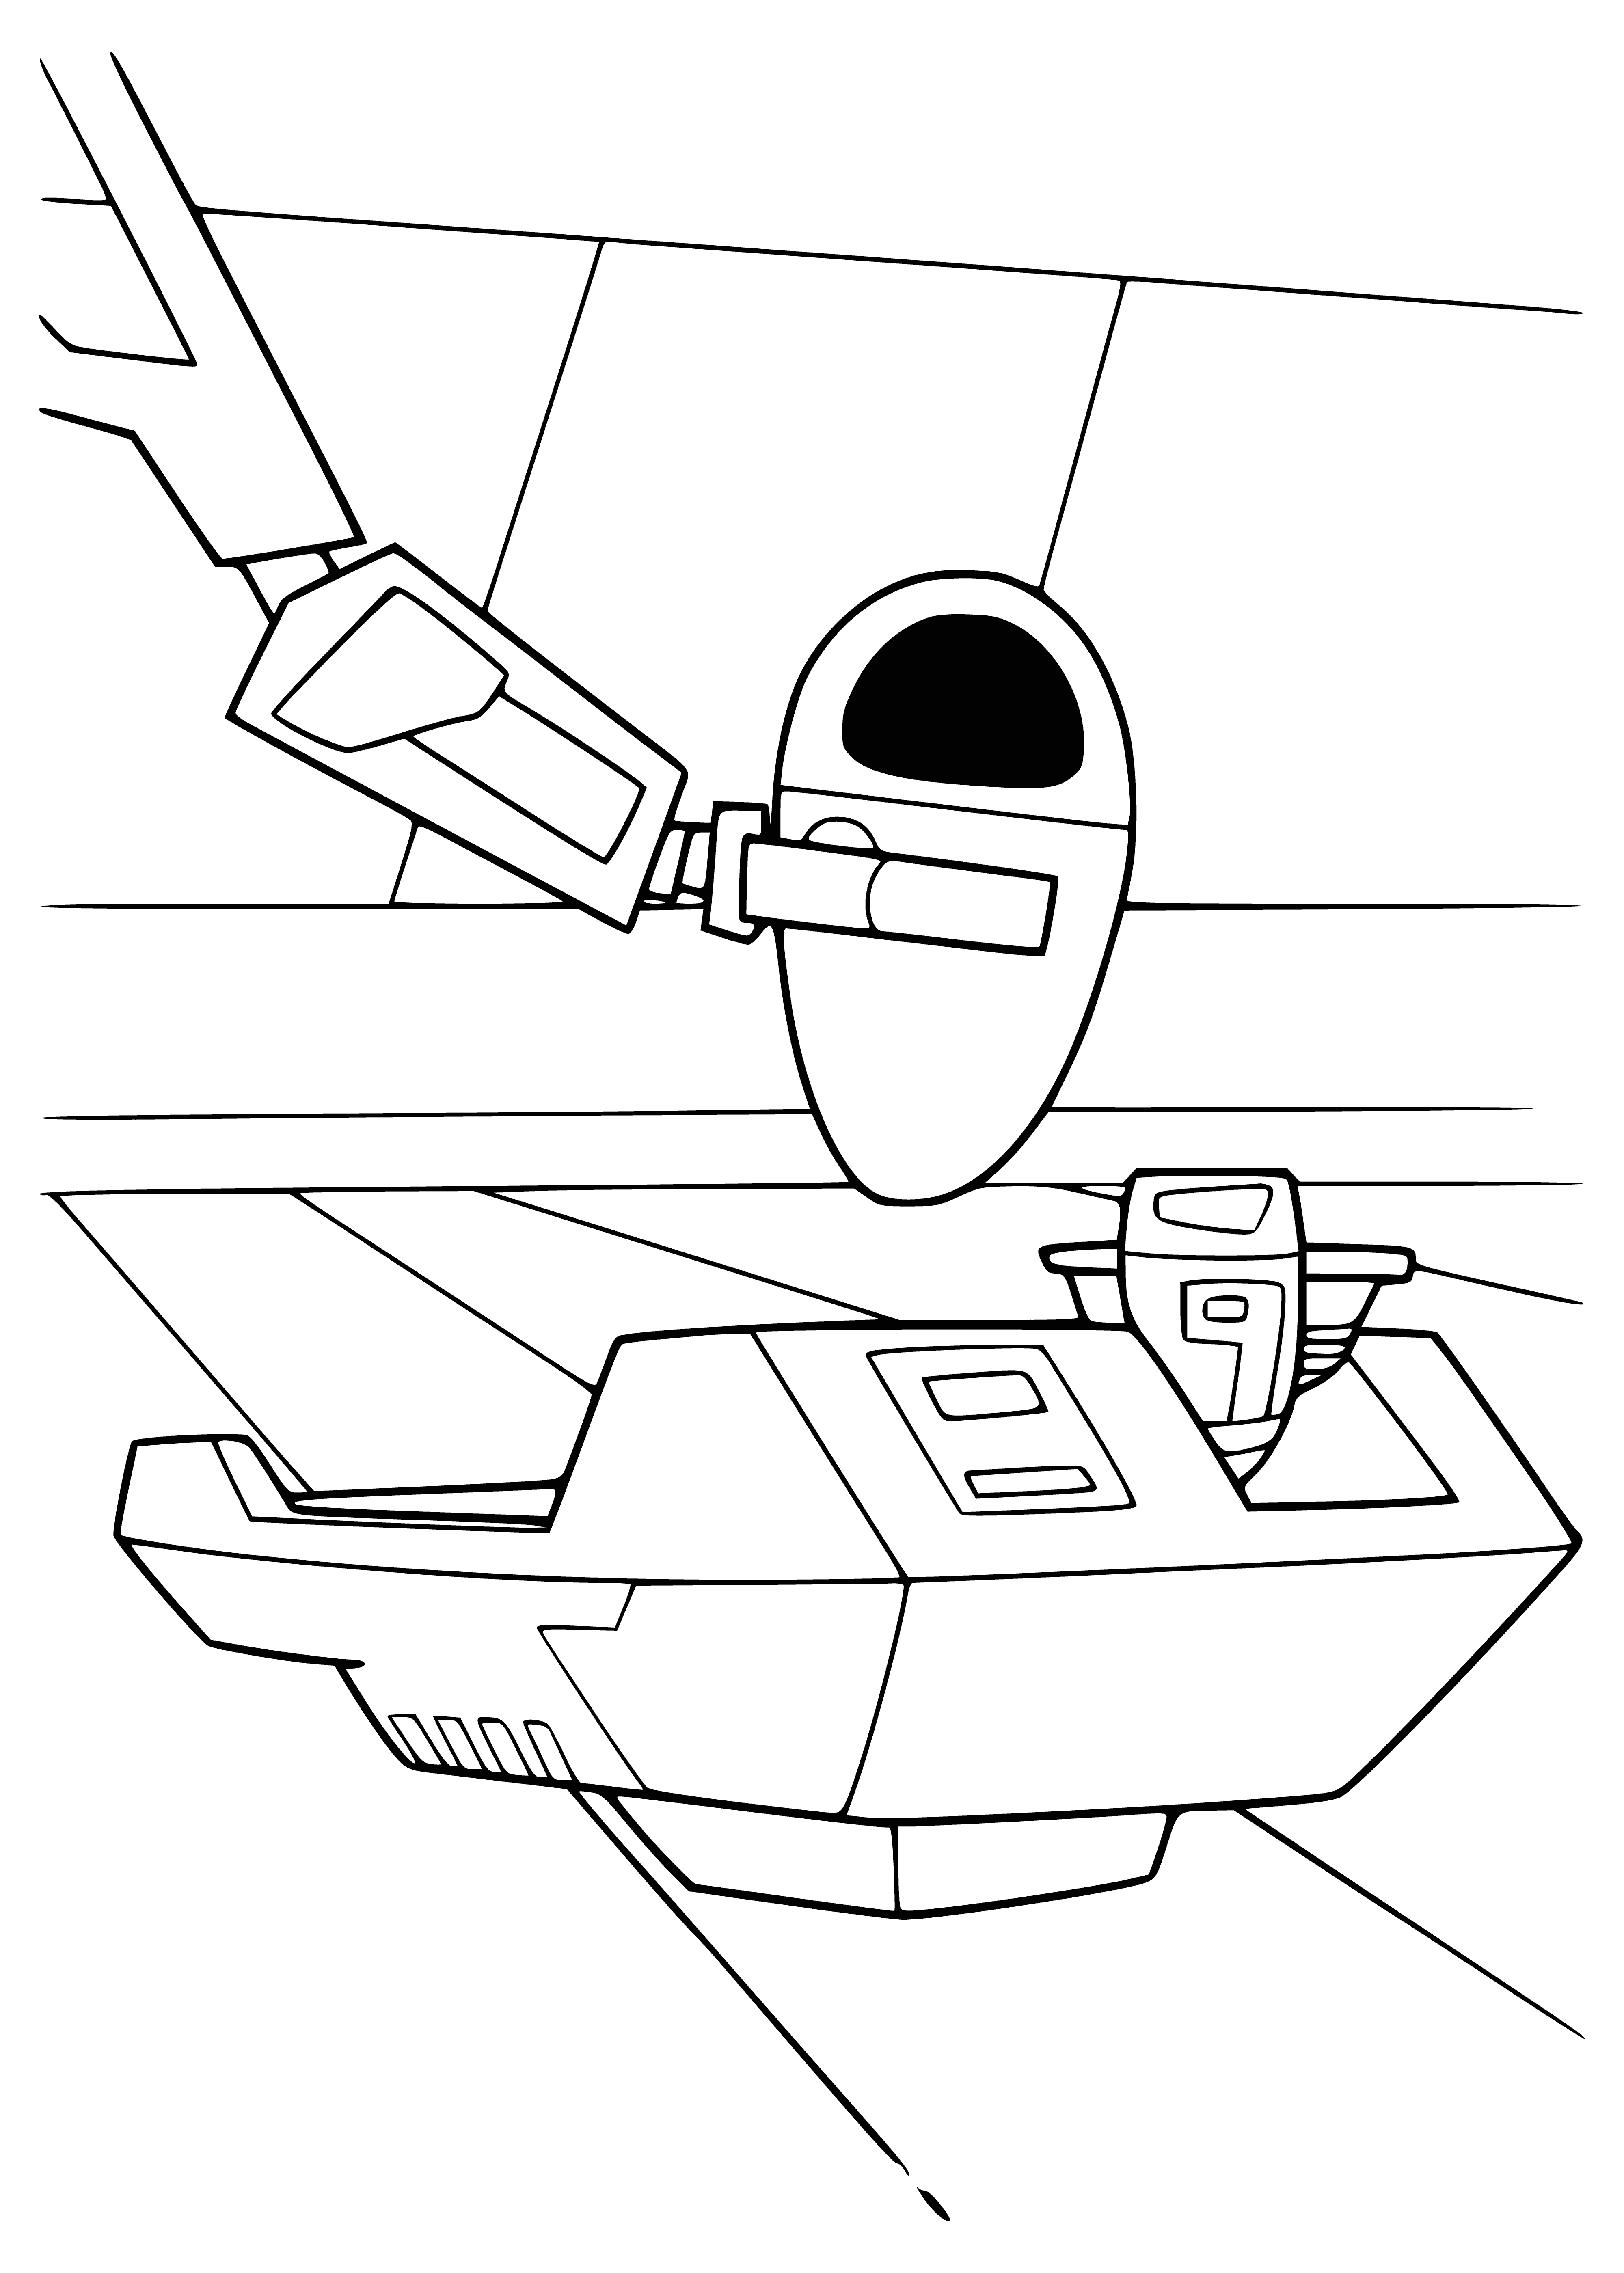 coloring page: Two robots approach each other; one large, one small, both with large eyes and happy faces.